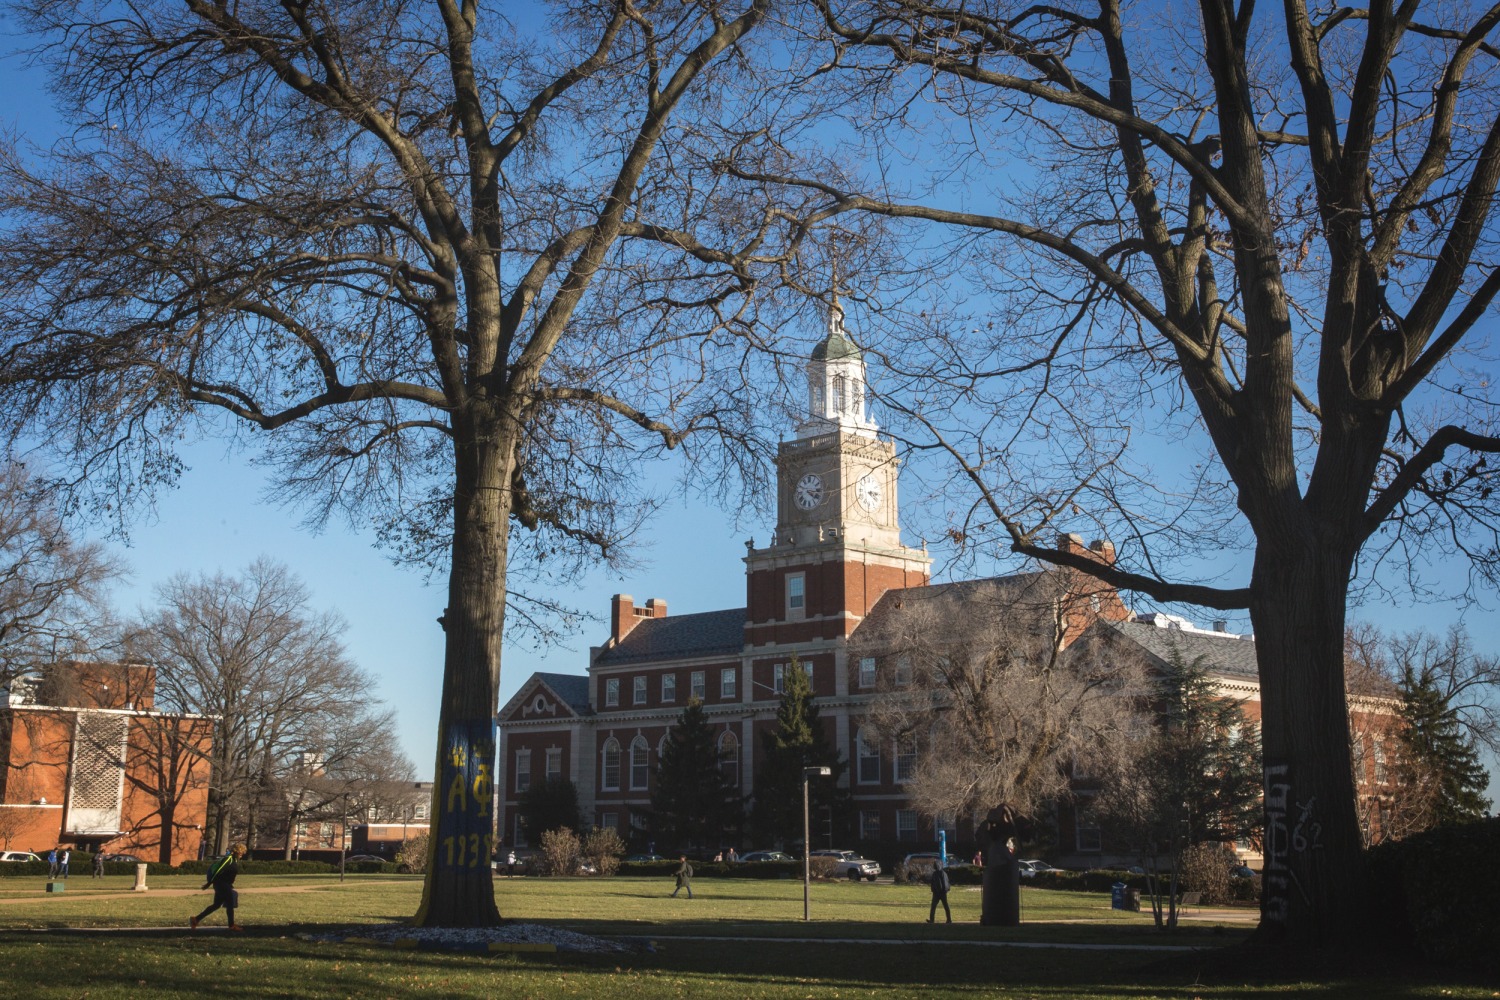 Six Juveniles Identified by FBI as Persons of Interest in Bomb Threats at HBCUs